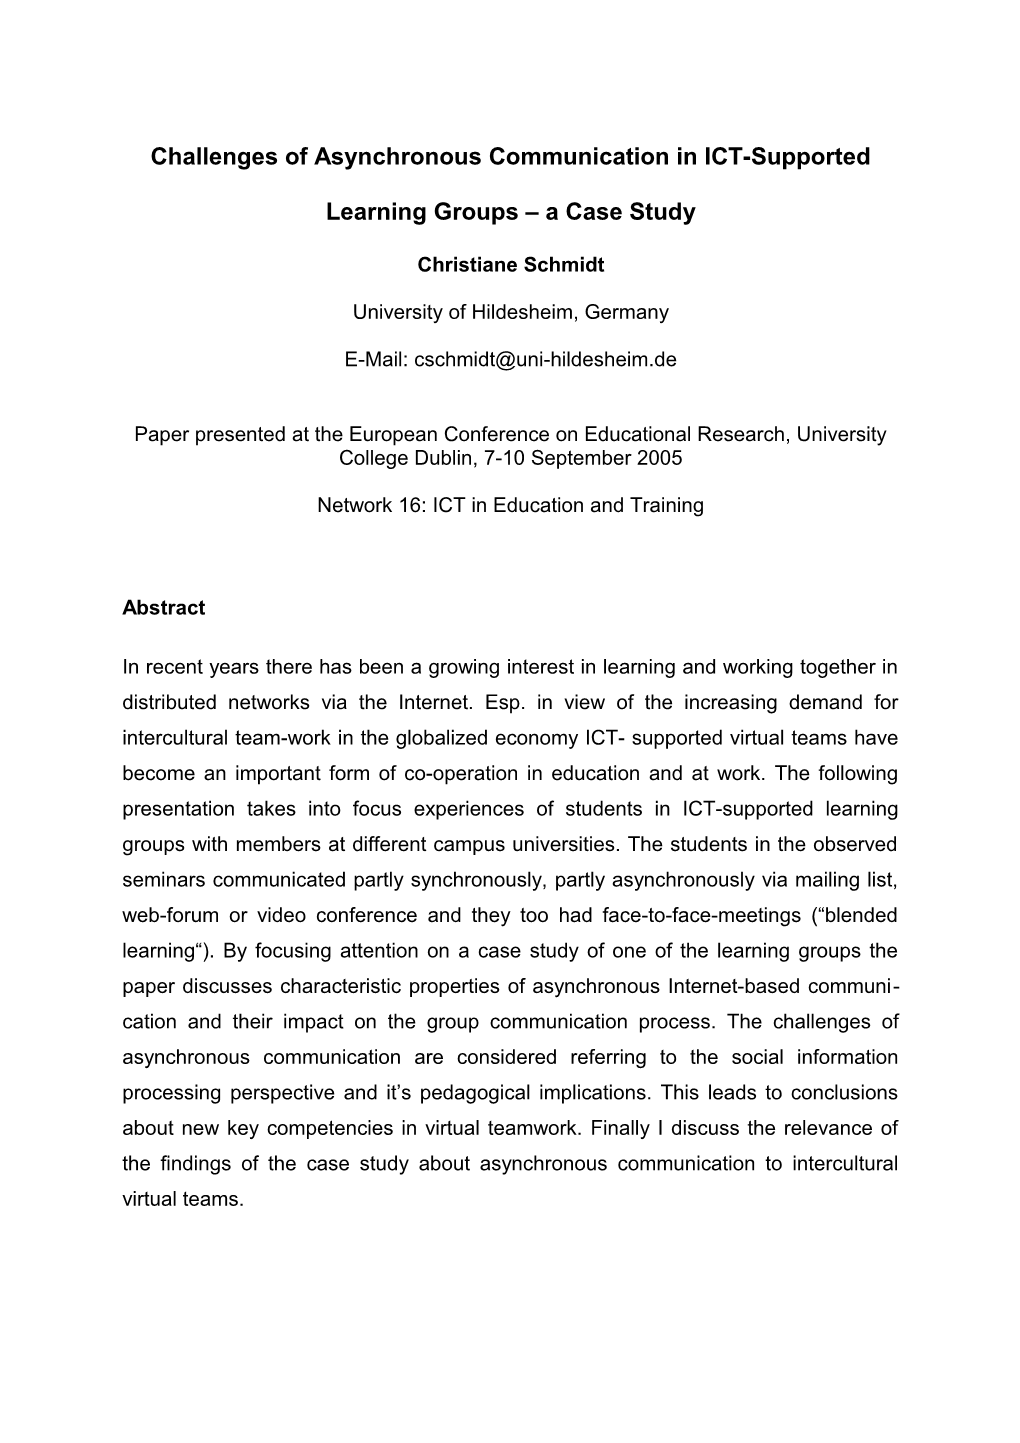 Challenges of Asynchronous Communication in ICT-Supported Learning Groups a Case Study